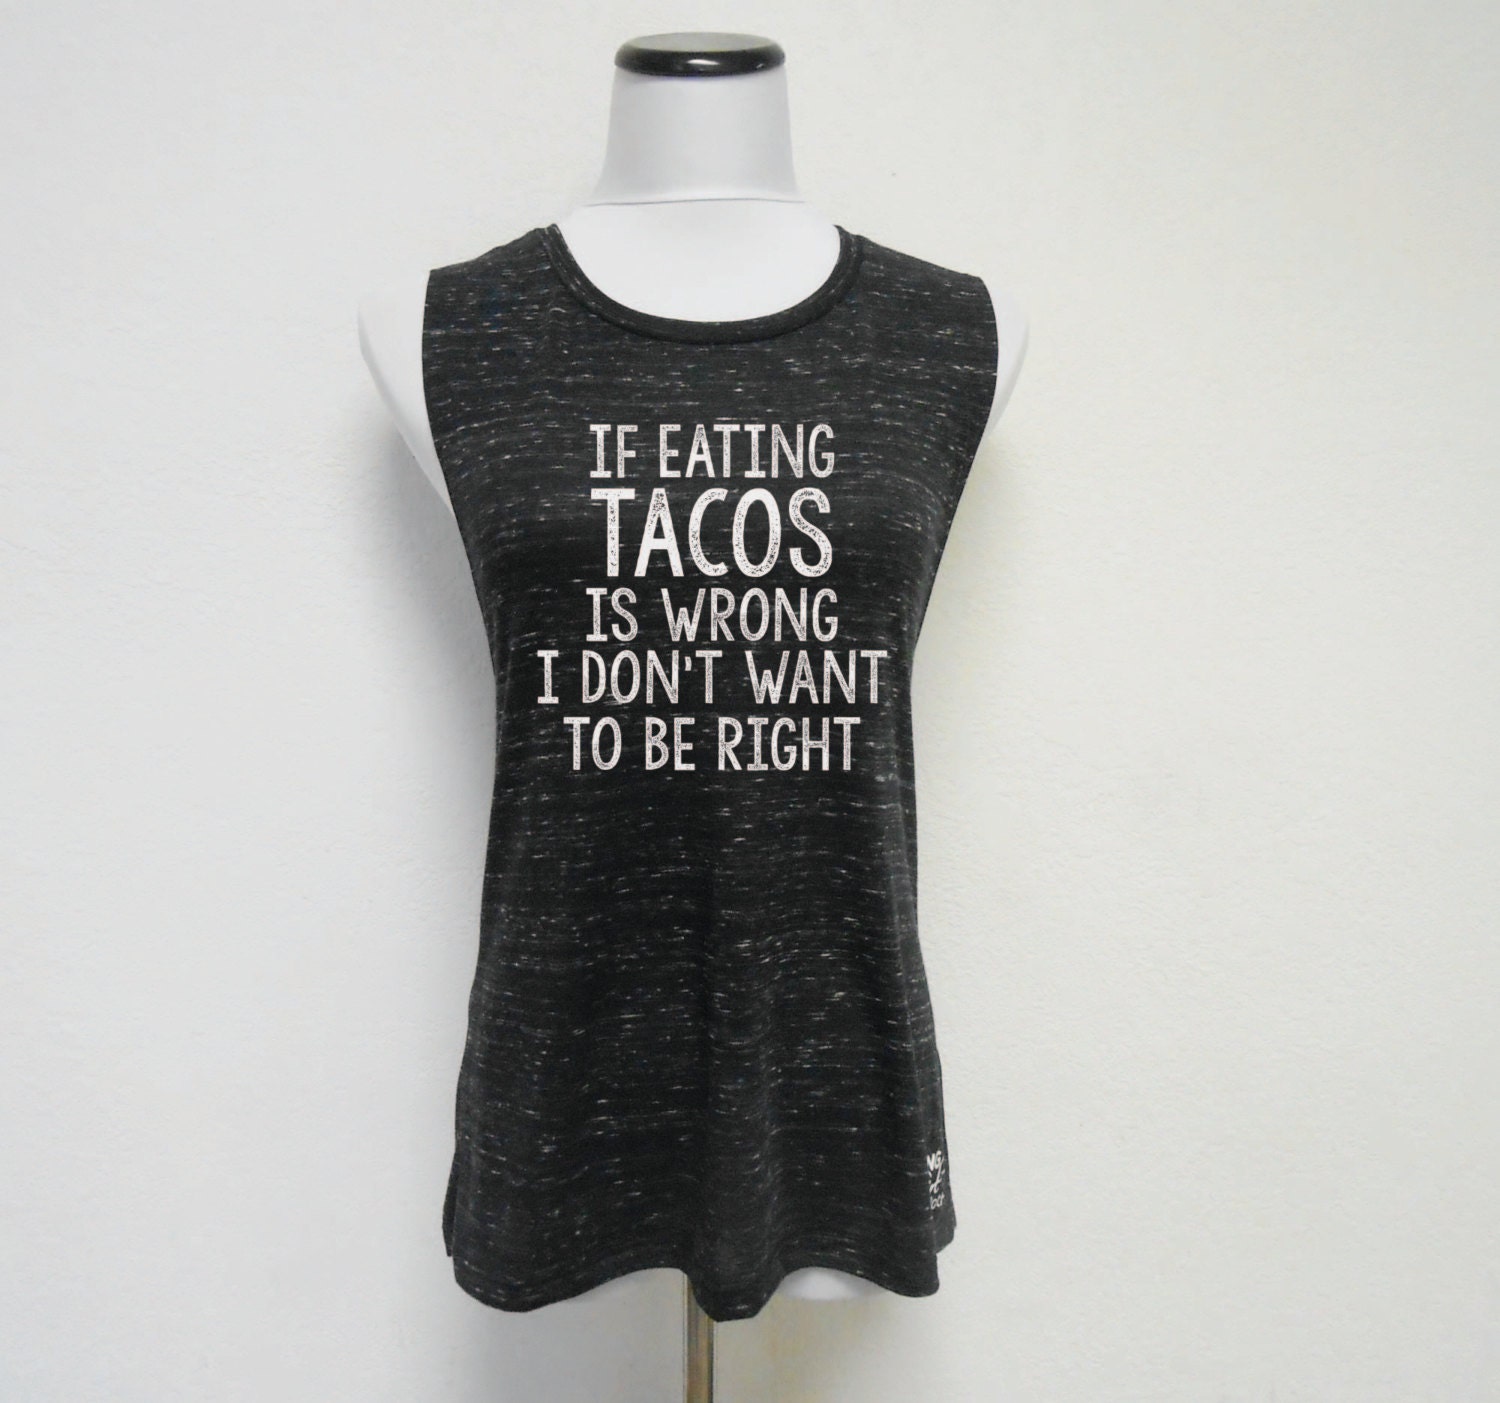 If Eating Tacos Is Wrong I Don't Want To Be Right. Womens